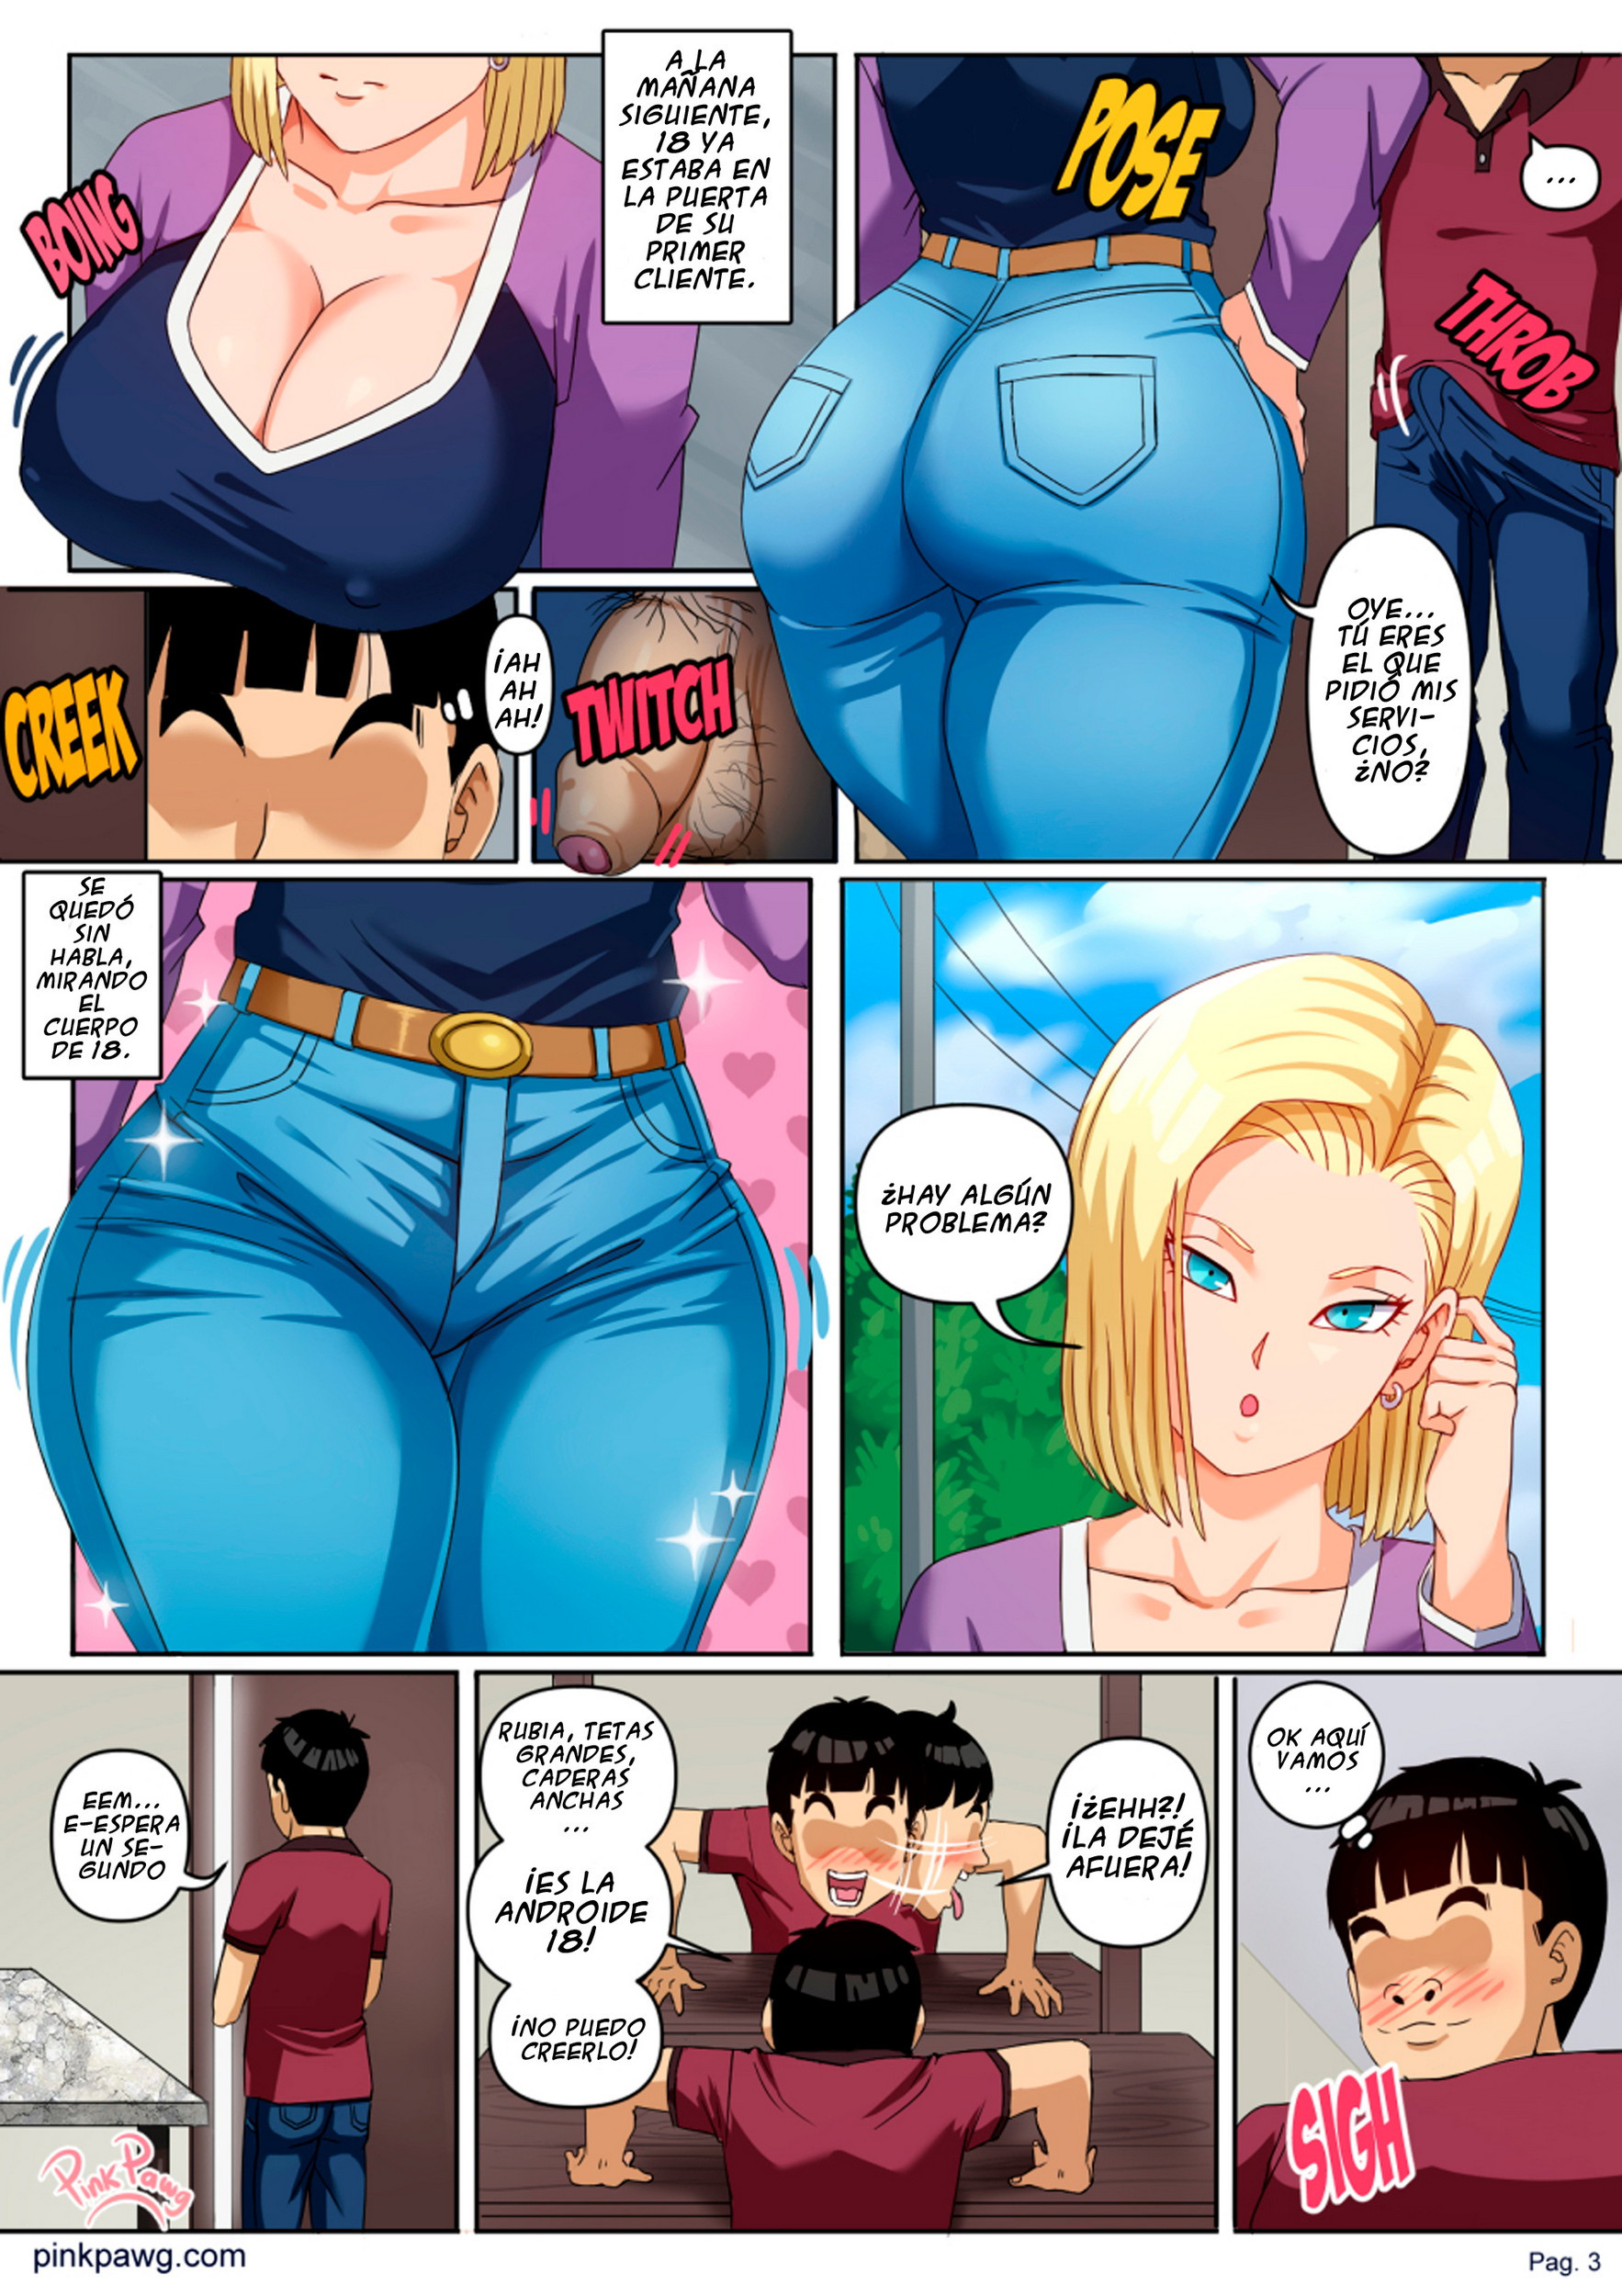 [Pink Pawg] Android 18 NTR Ep.4 - 2